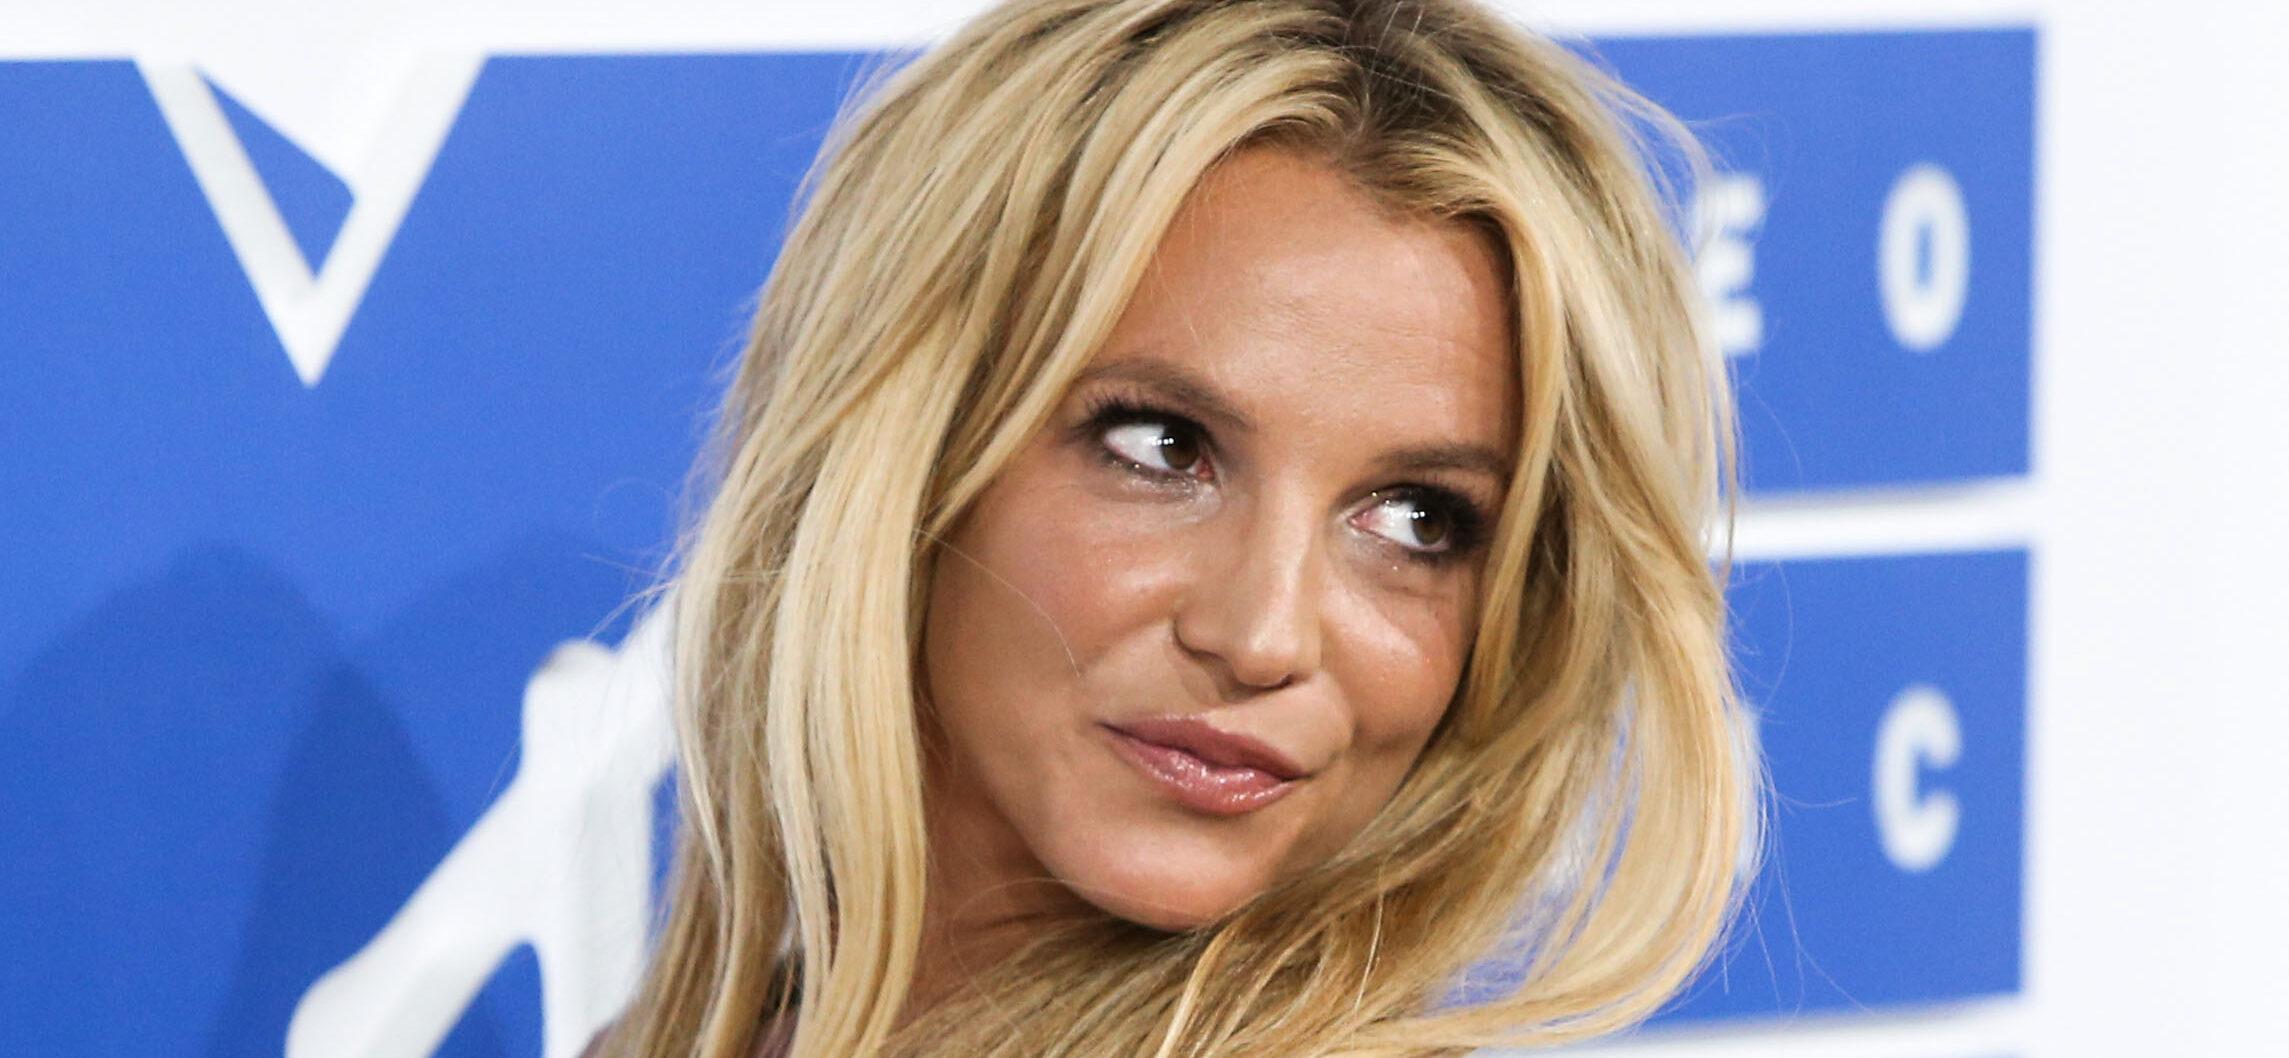 Britney Spears Reportedly Still Involved With Former Employee Despite Criminal Past